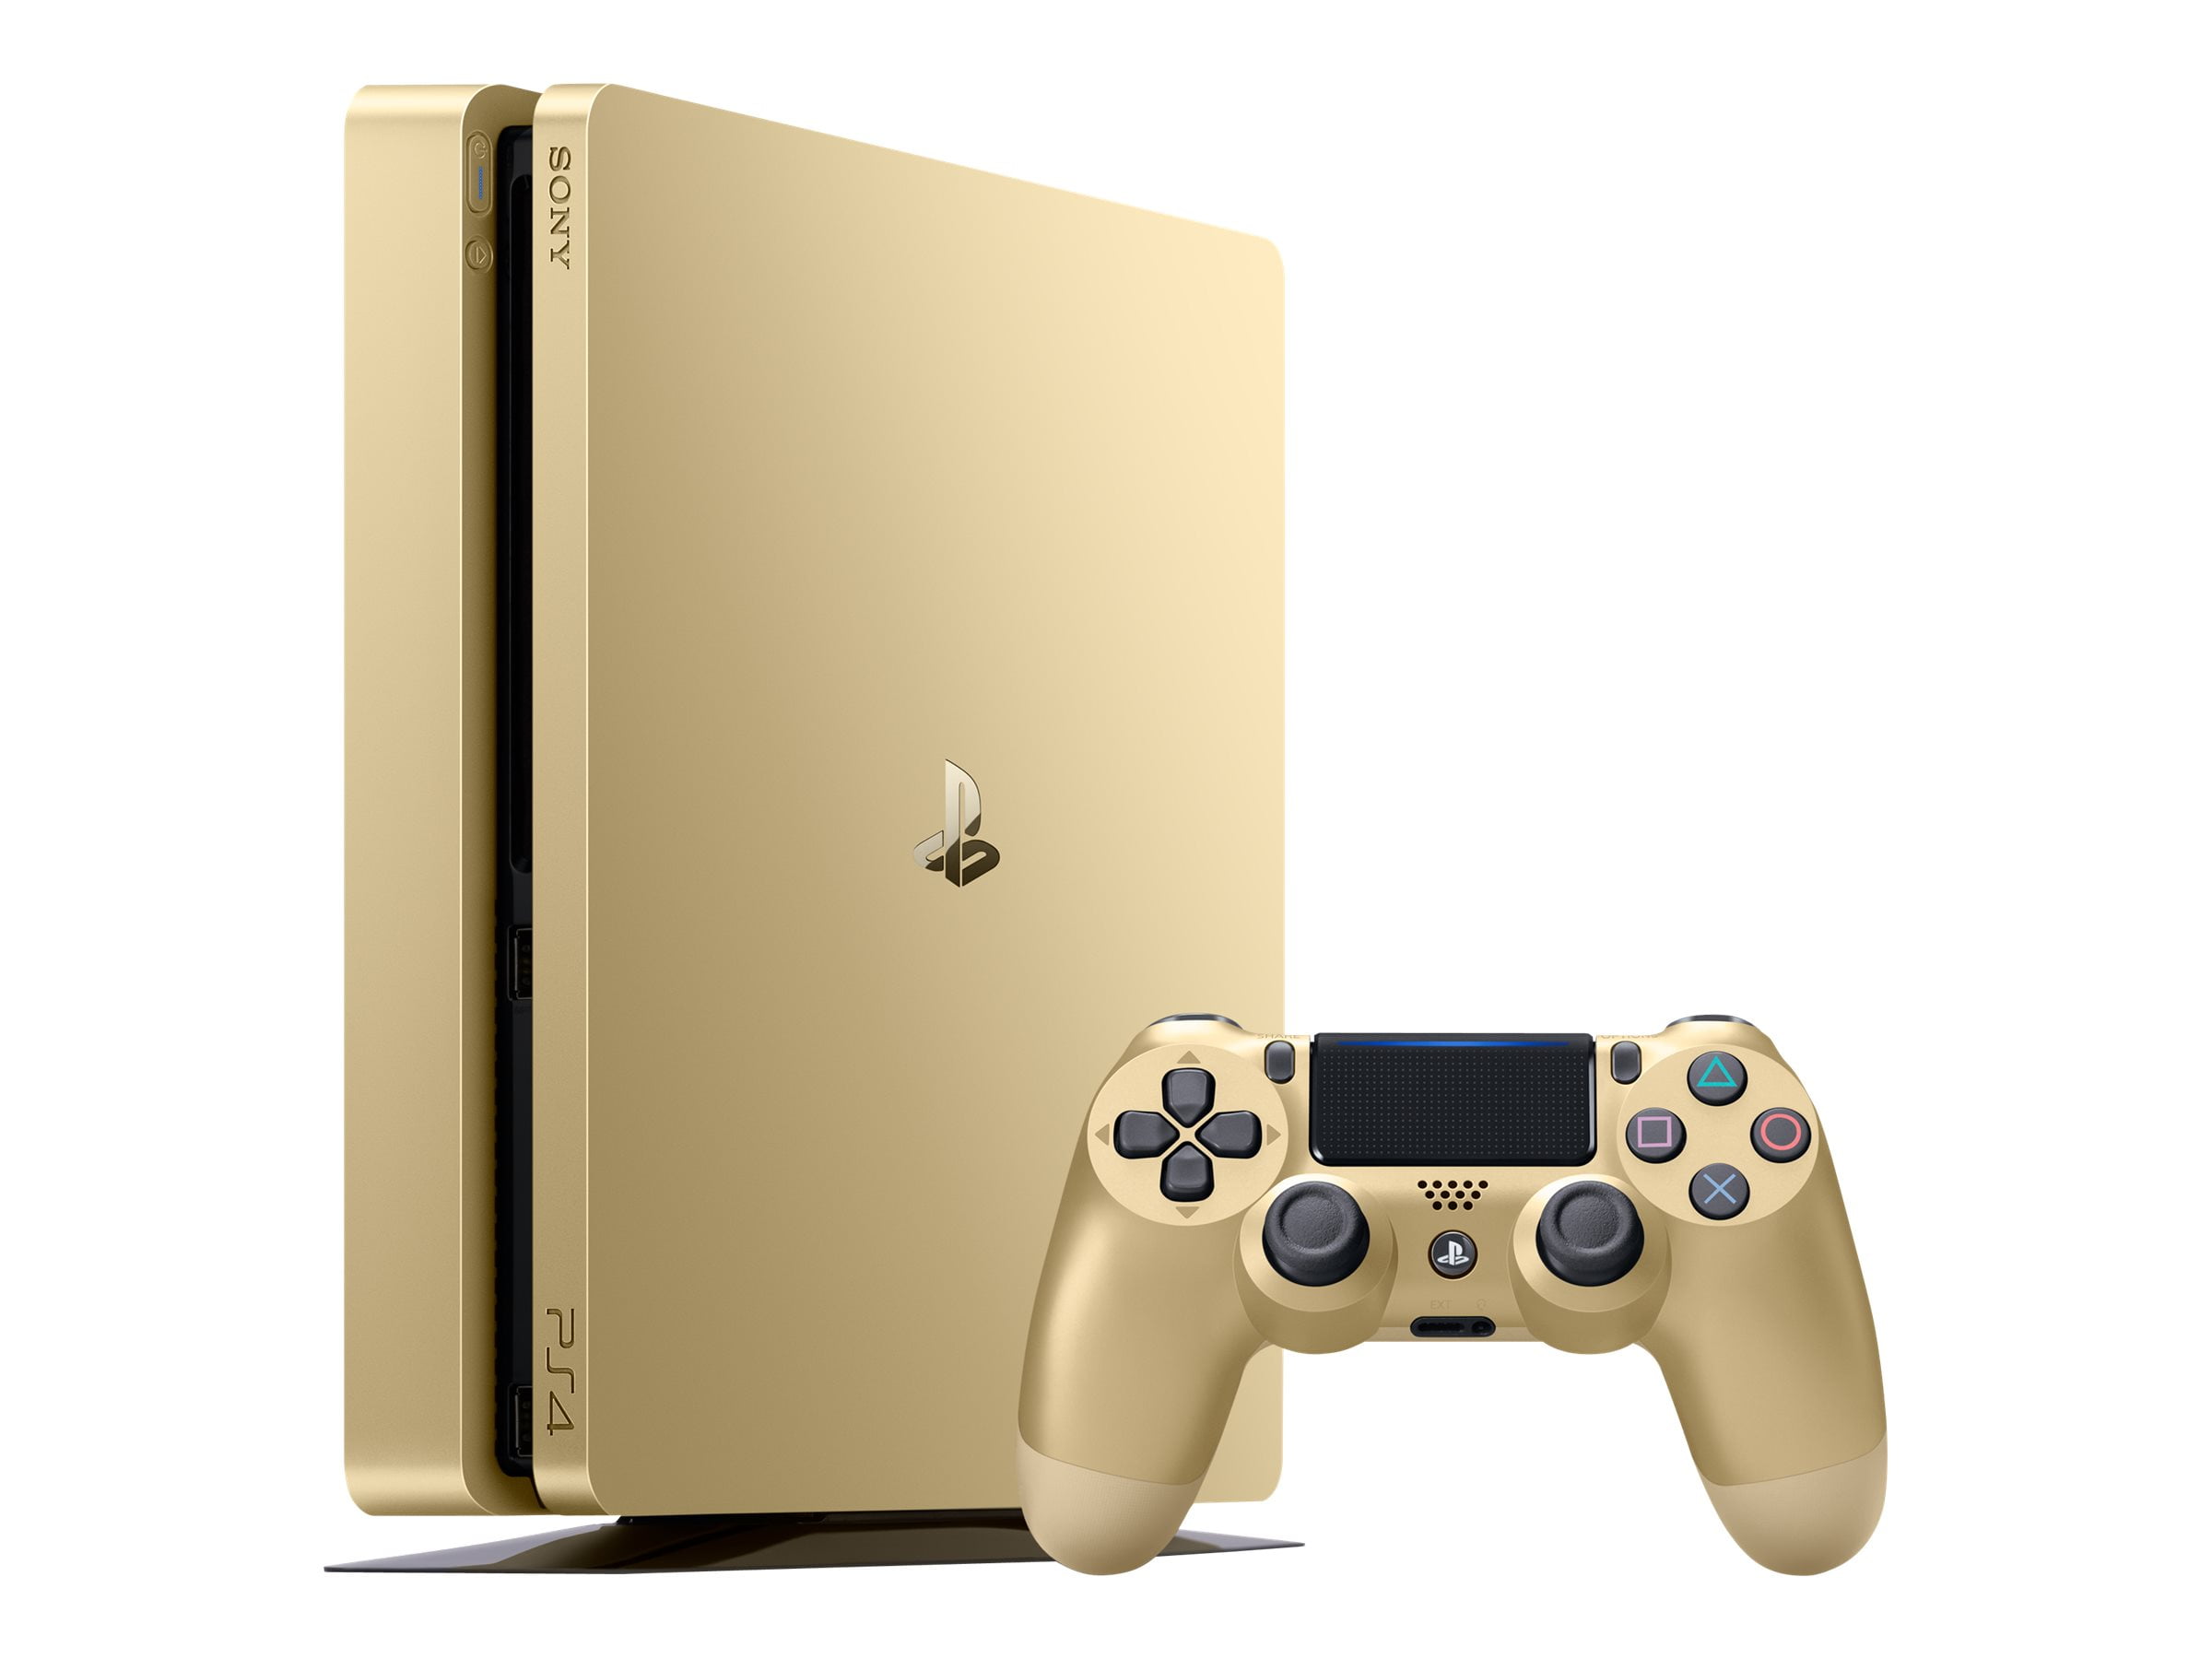 Console PlayStation 4 Pro : : Games e Consoles